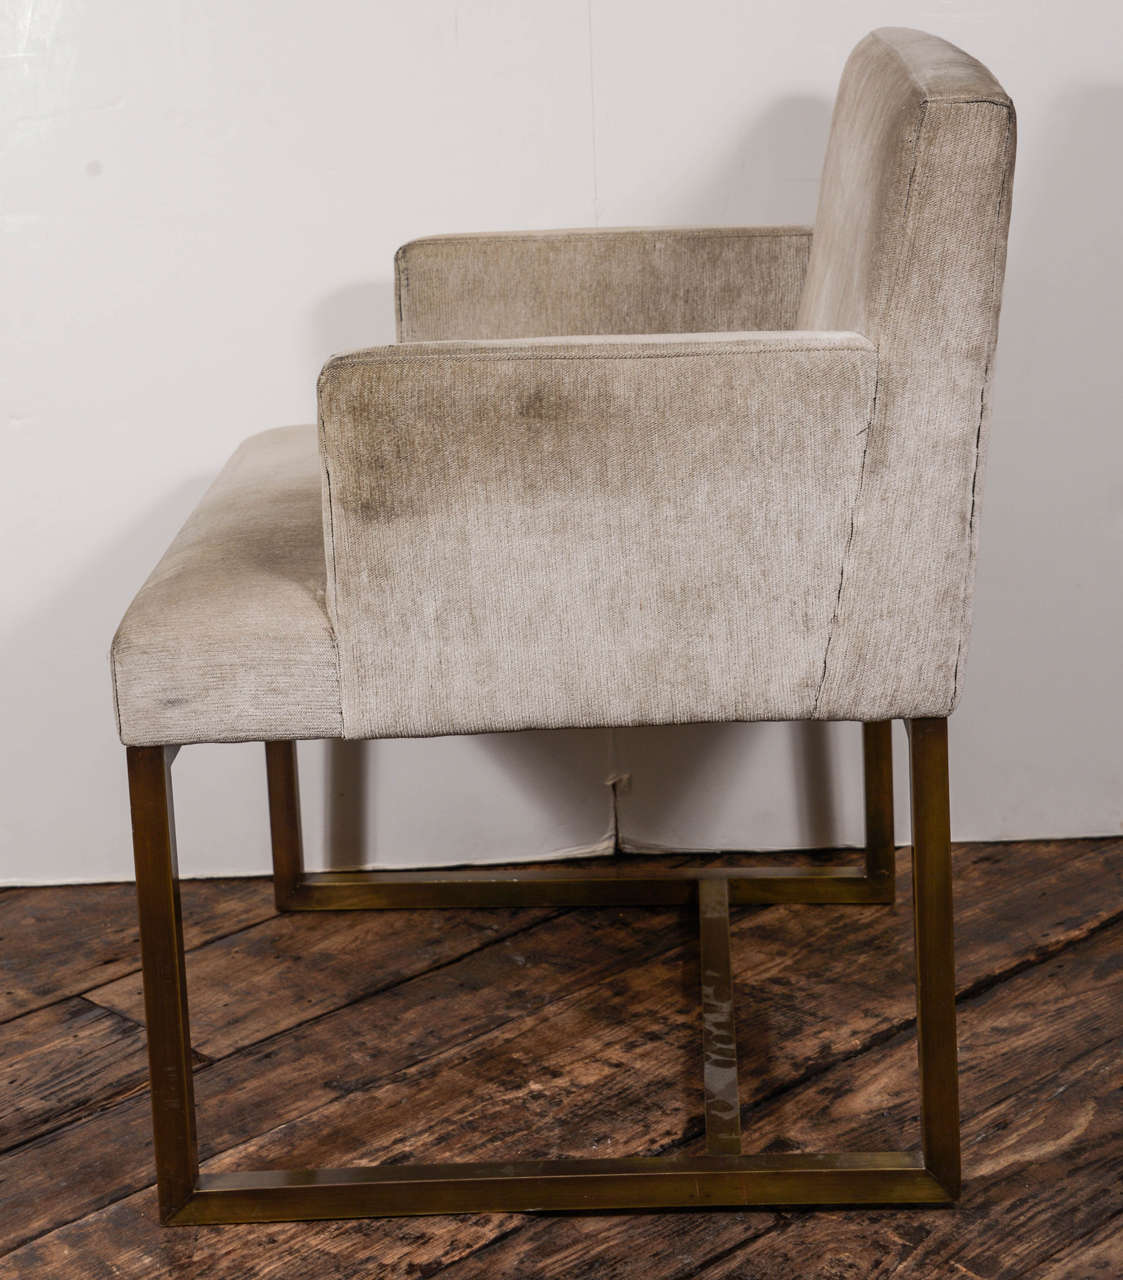 Mid-20th Century Vintage Brass Chairs